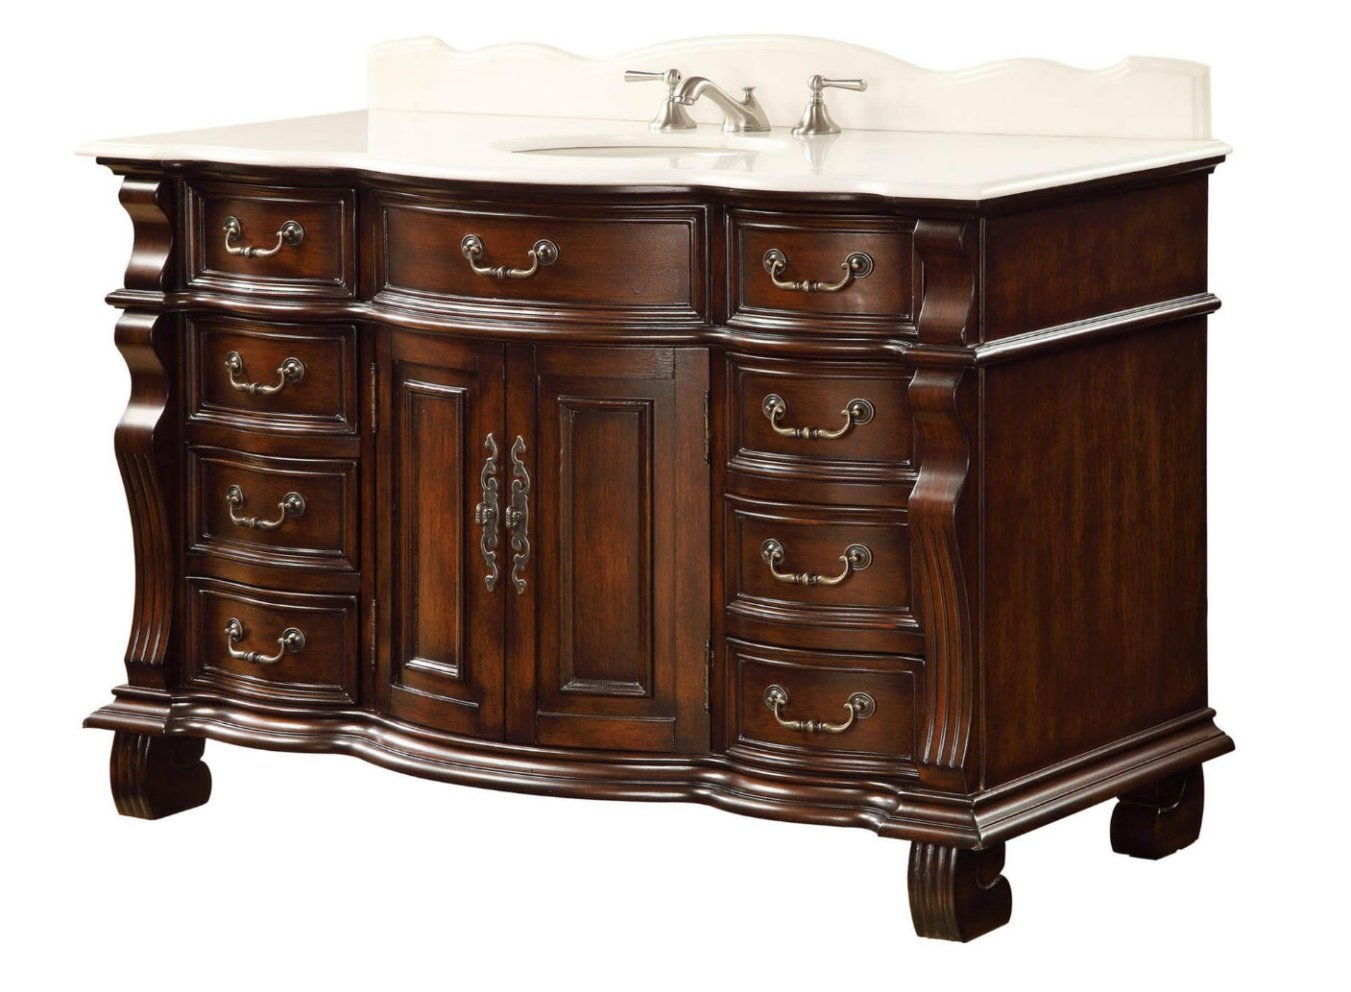 60 Inch Bathroom Vanity With Drawers